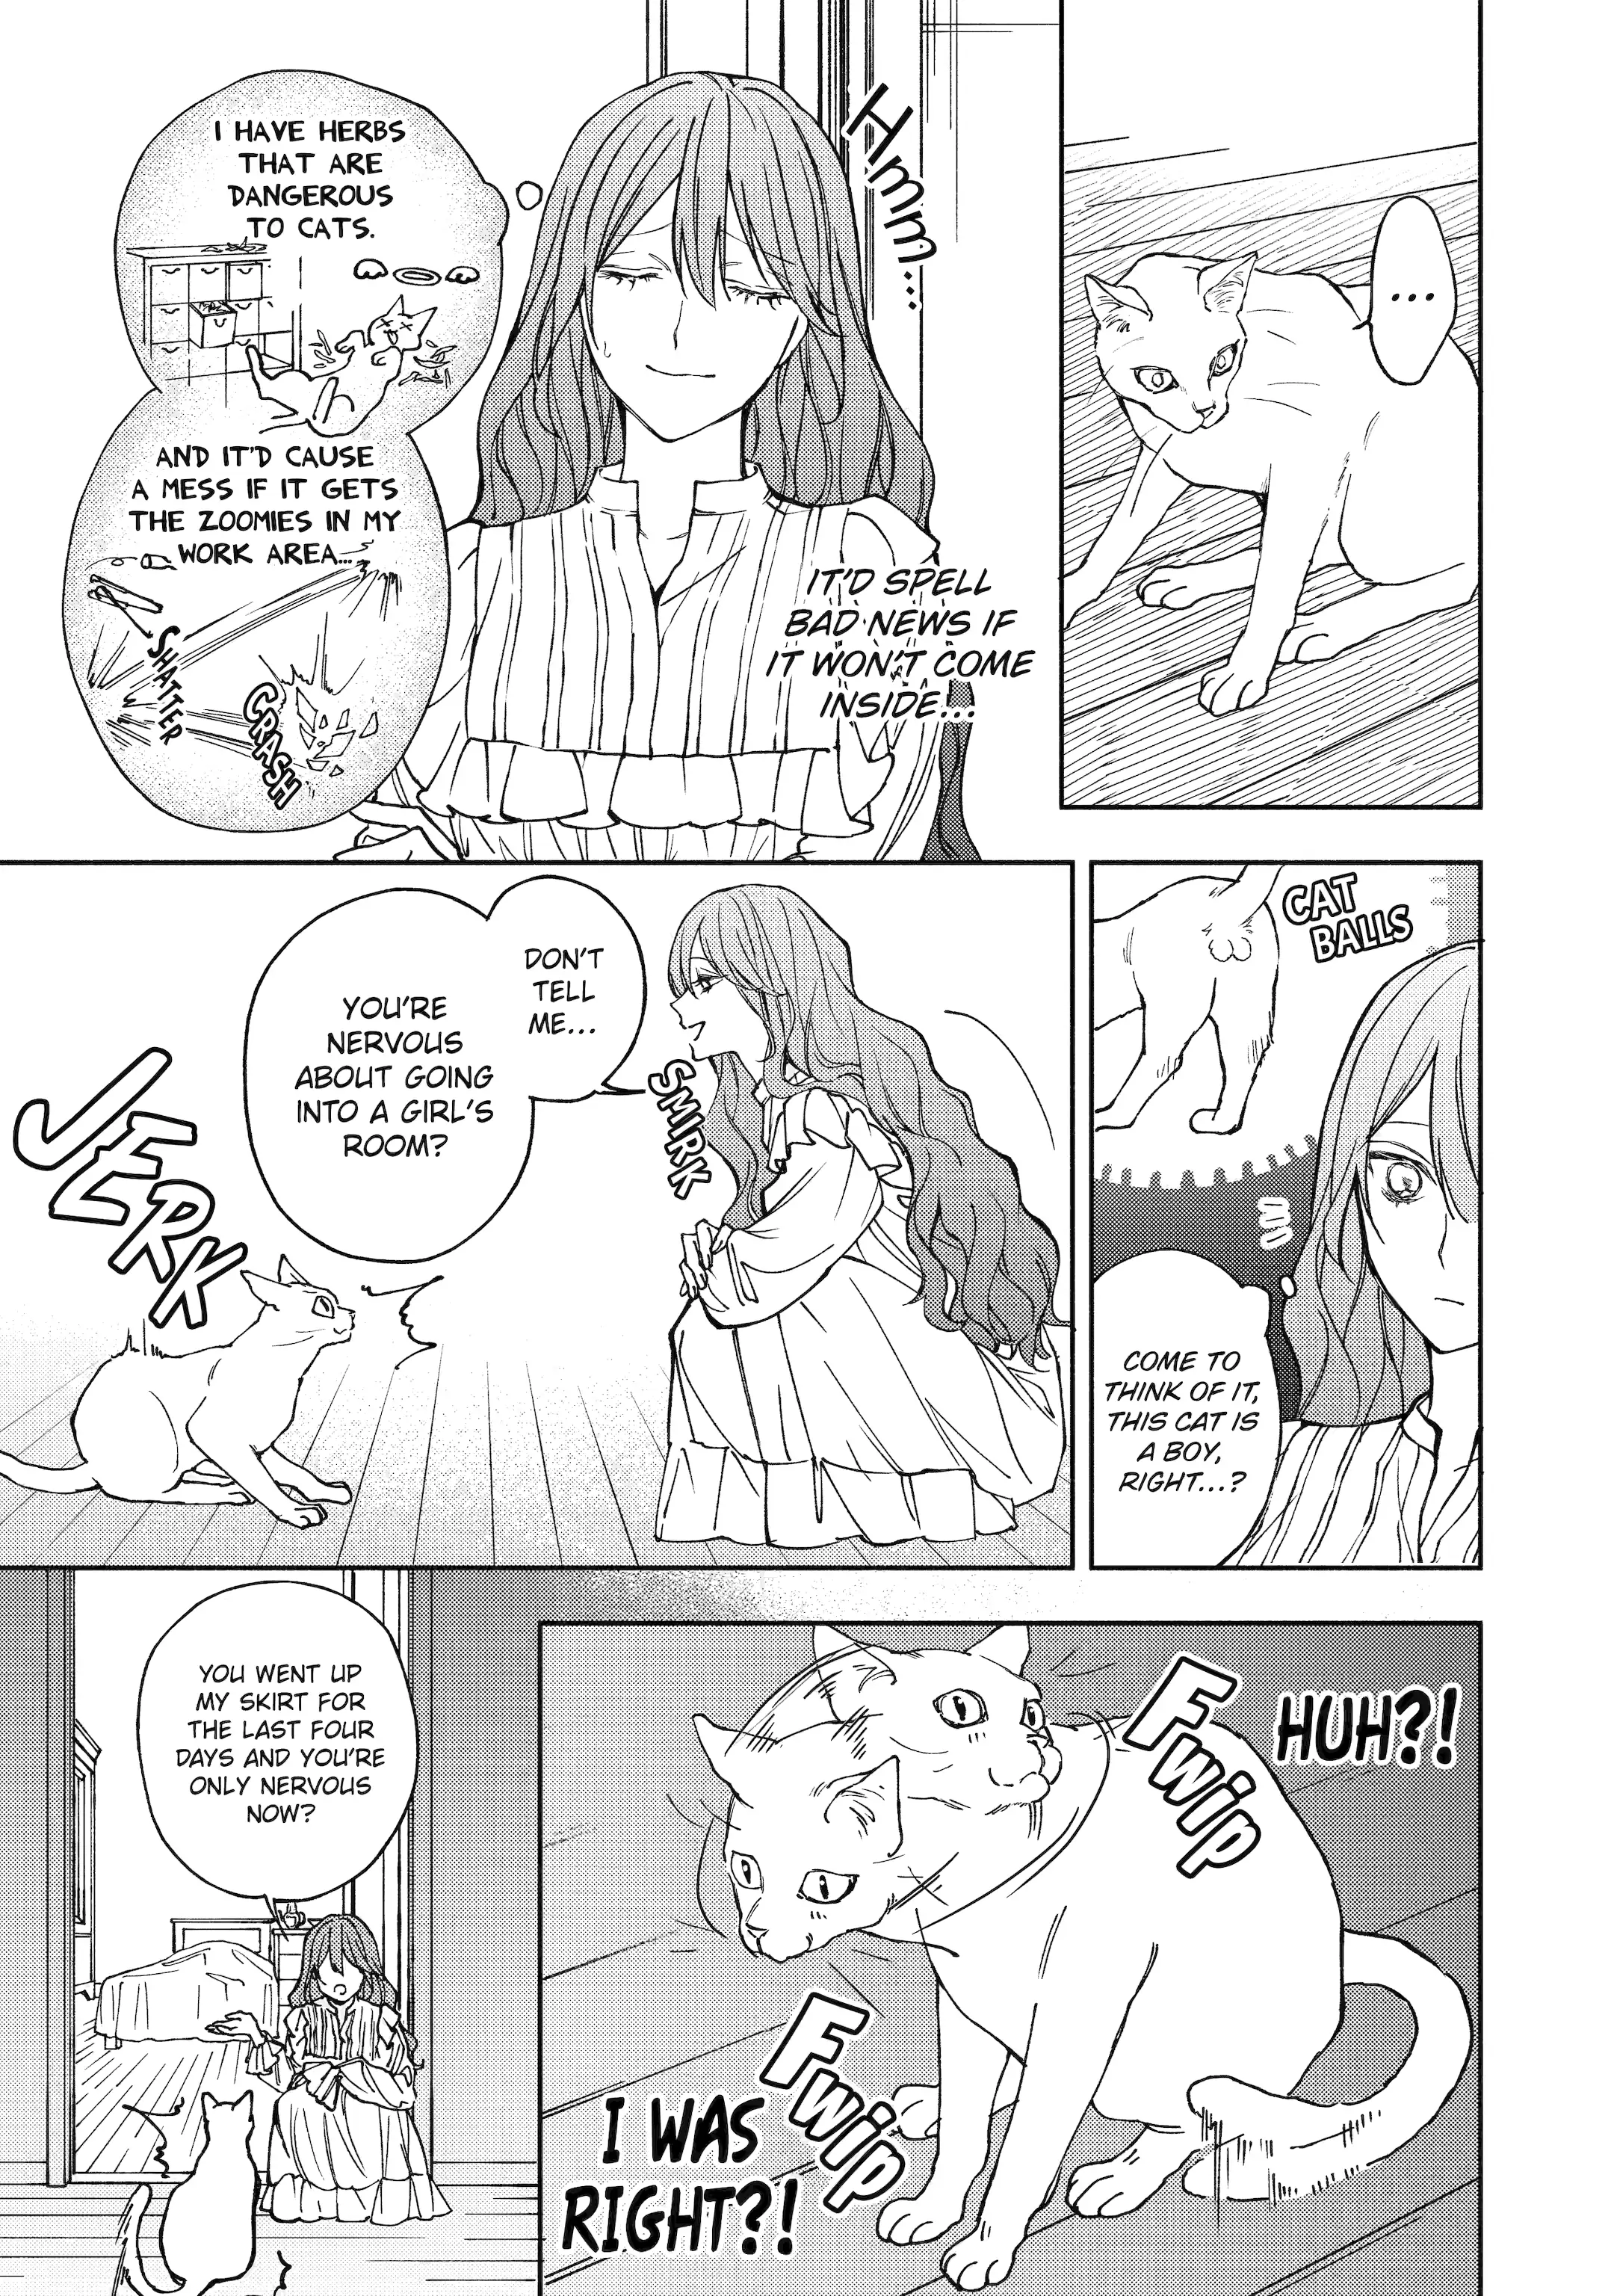 The Prince's Keeper: The Cursed Prince Is Too Fluffy To Resist! - Page 2